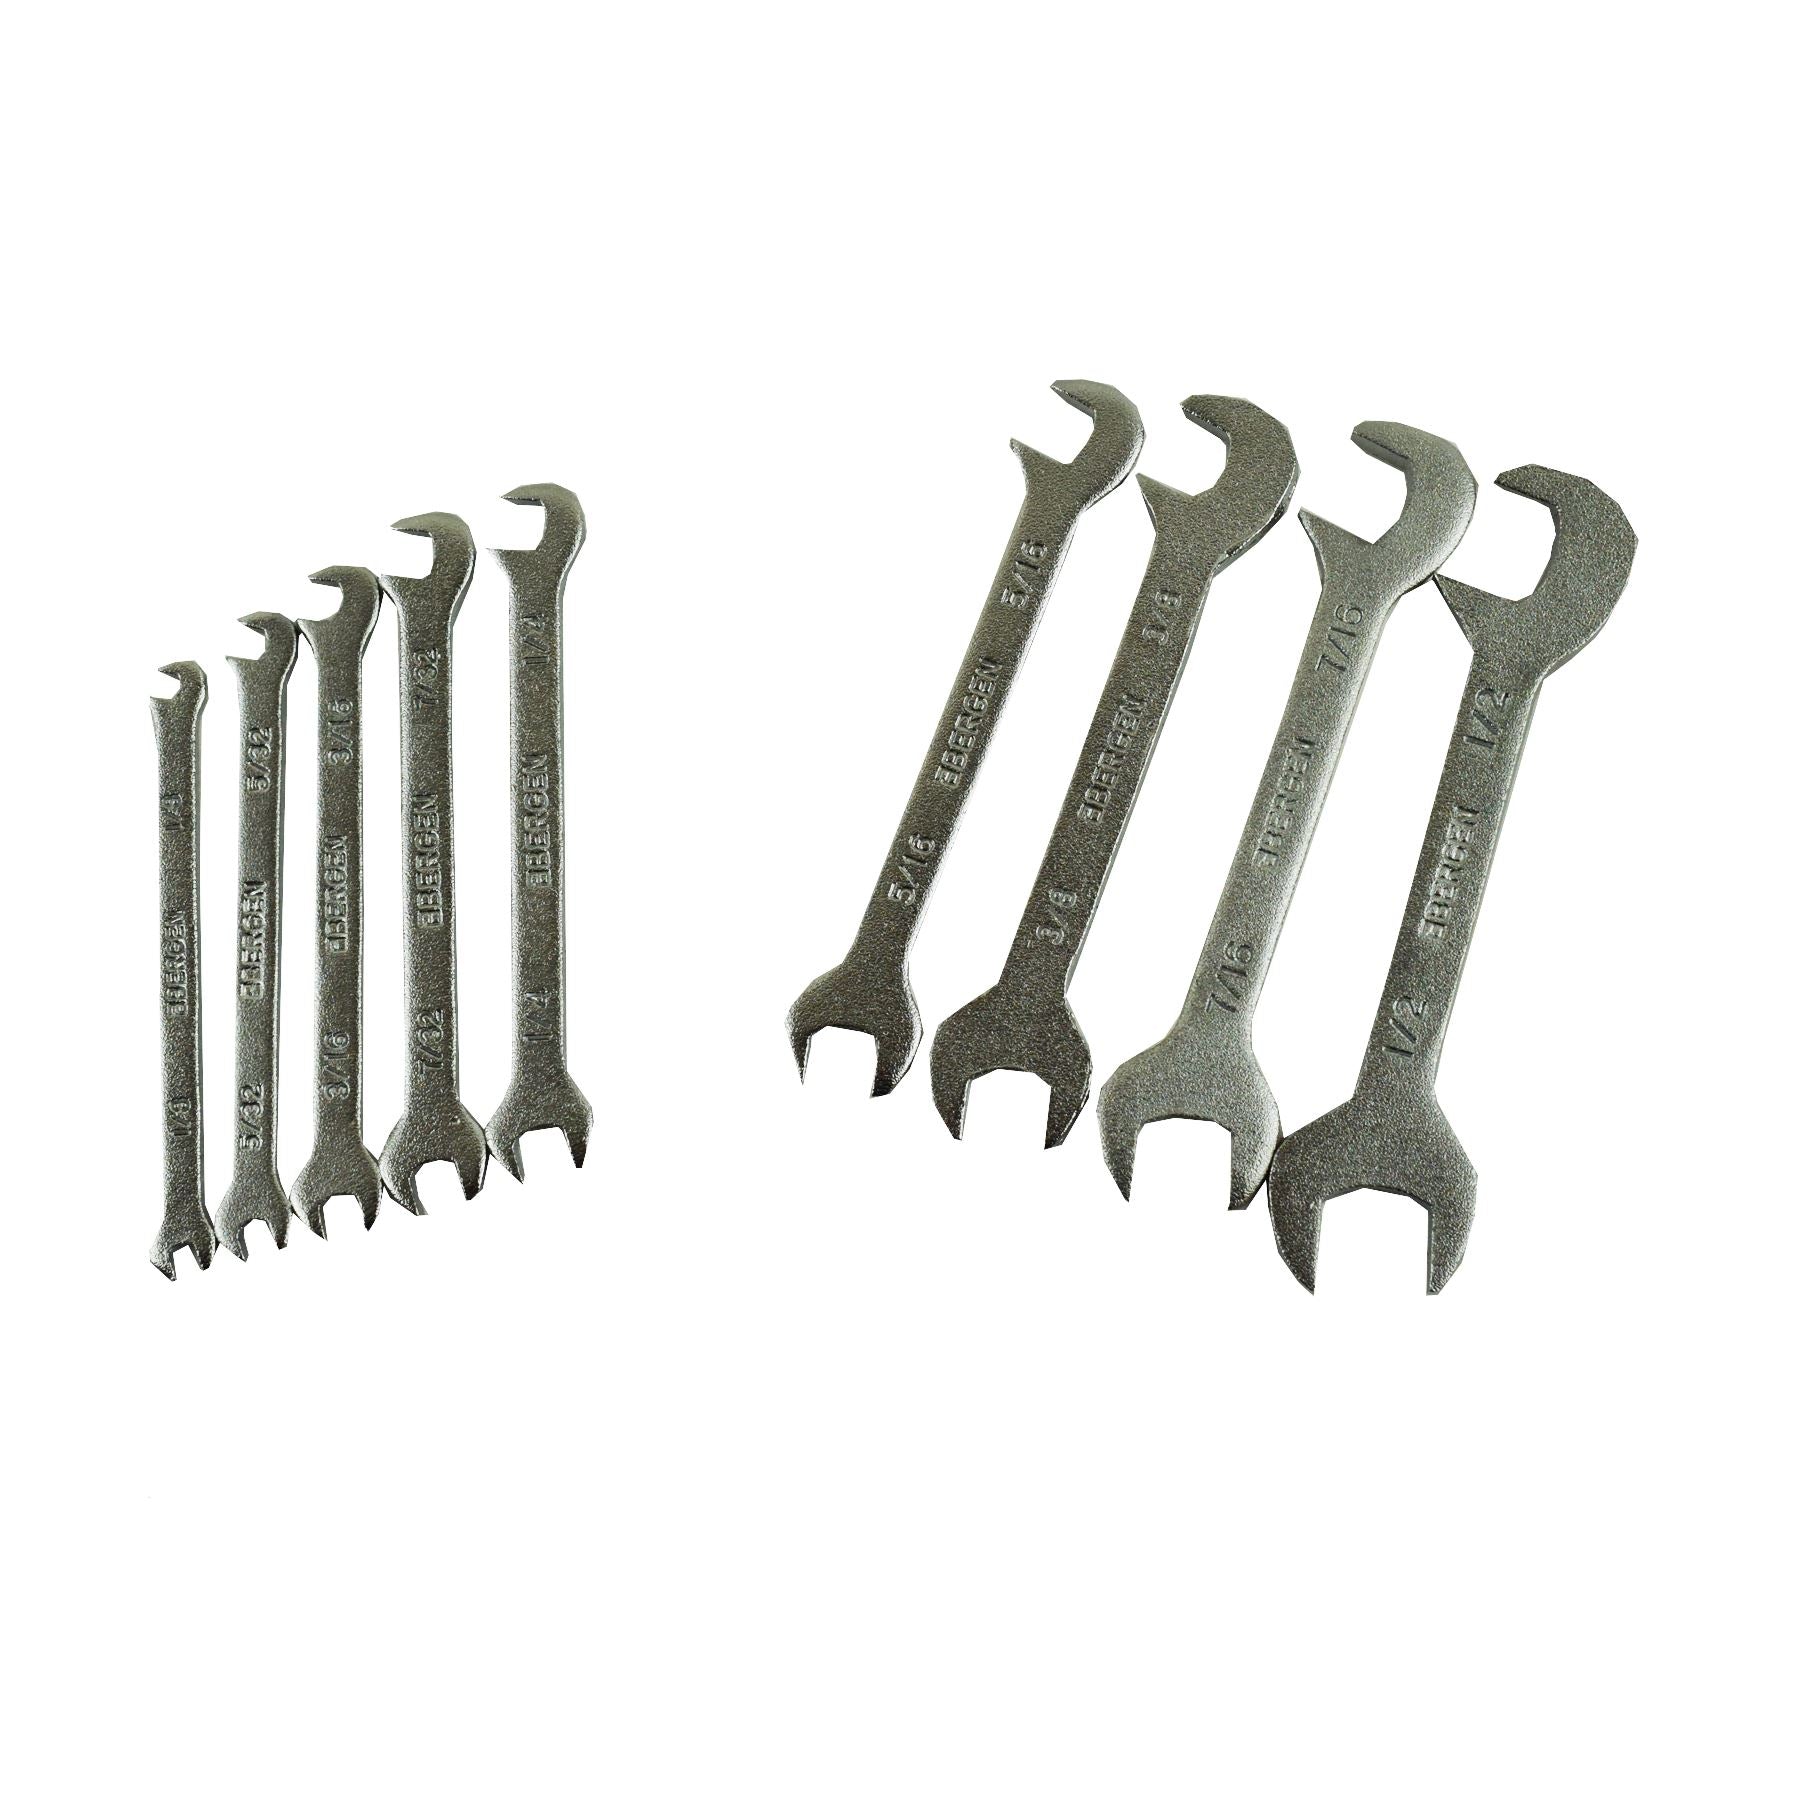 Mini Spanner Wrench Set Imperial SAE 9pc 1/8" - 1/2" Model Engineering Hobby